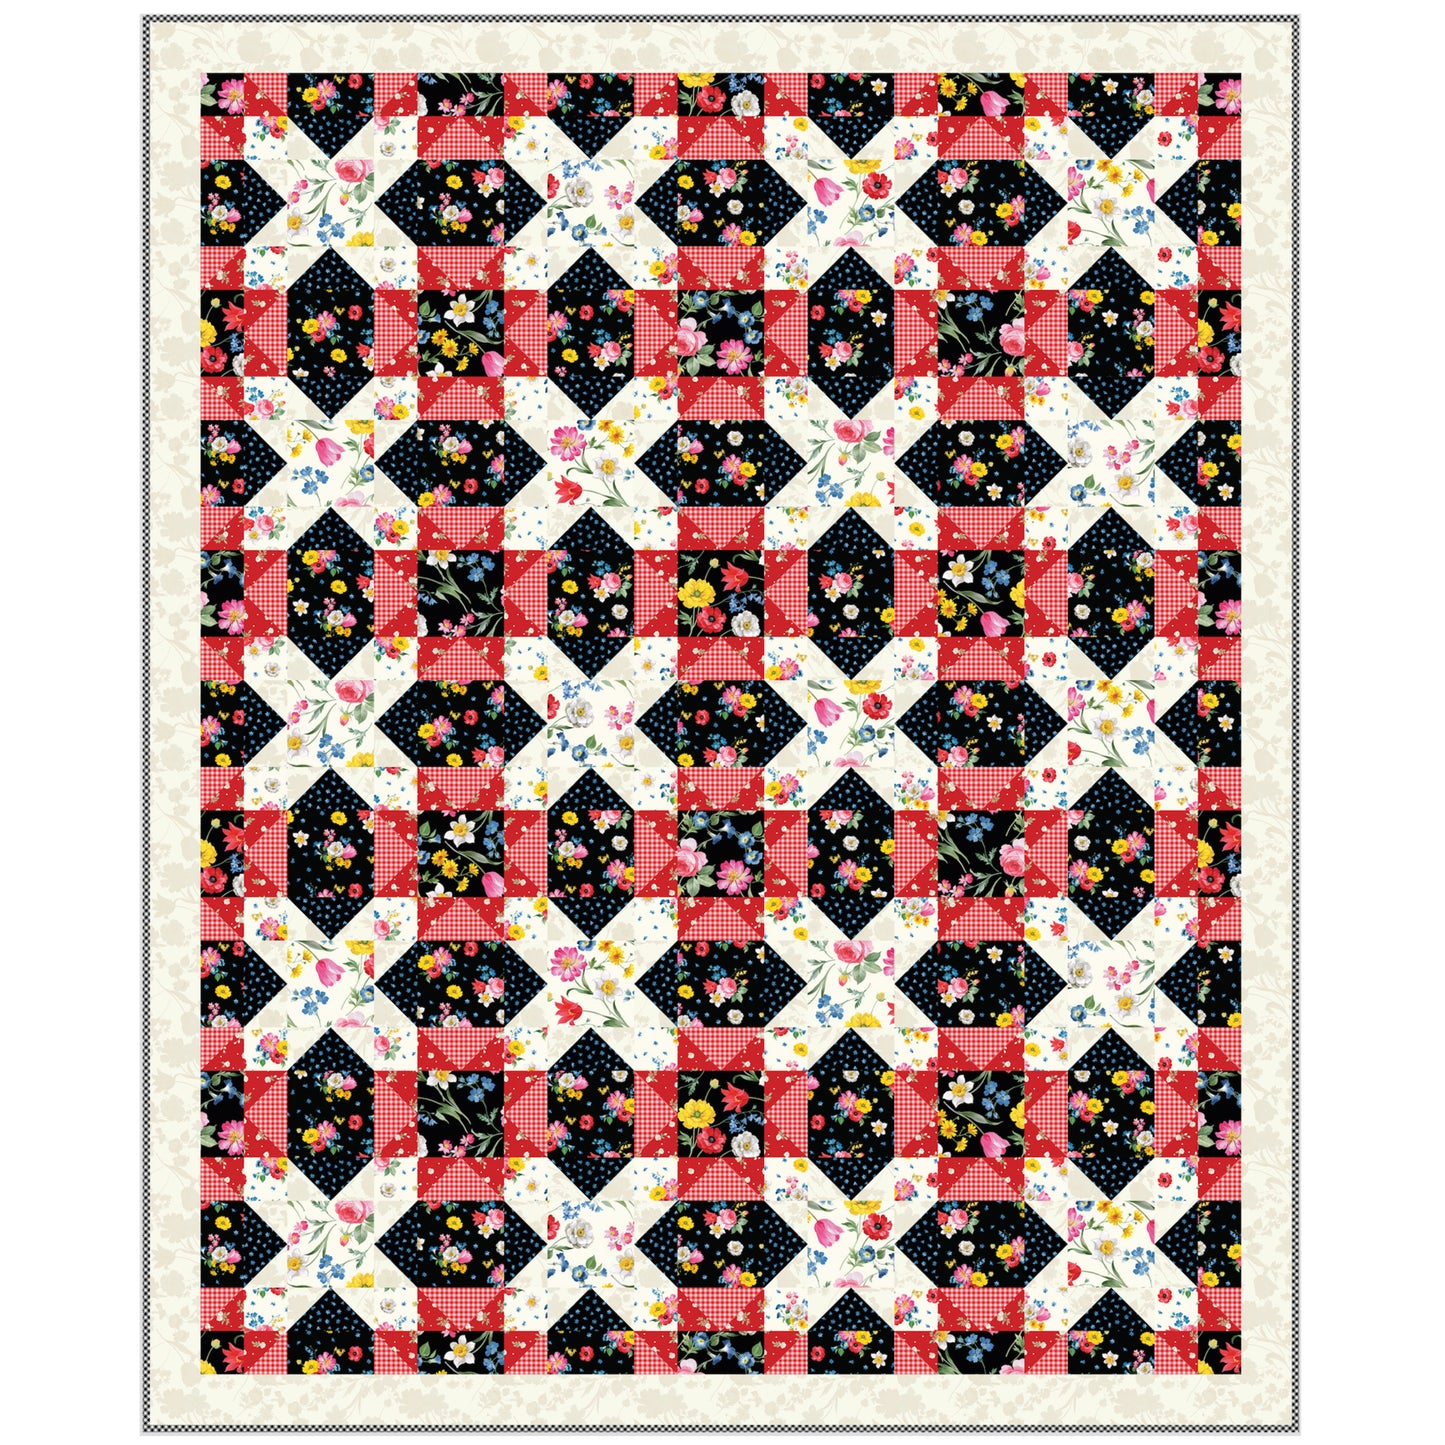 Vibrant Red and black floral quilt with blocks of X-s like trellises.